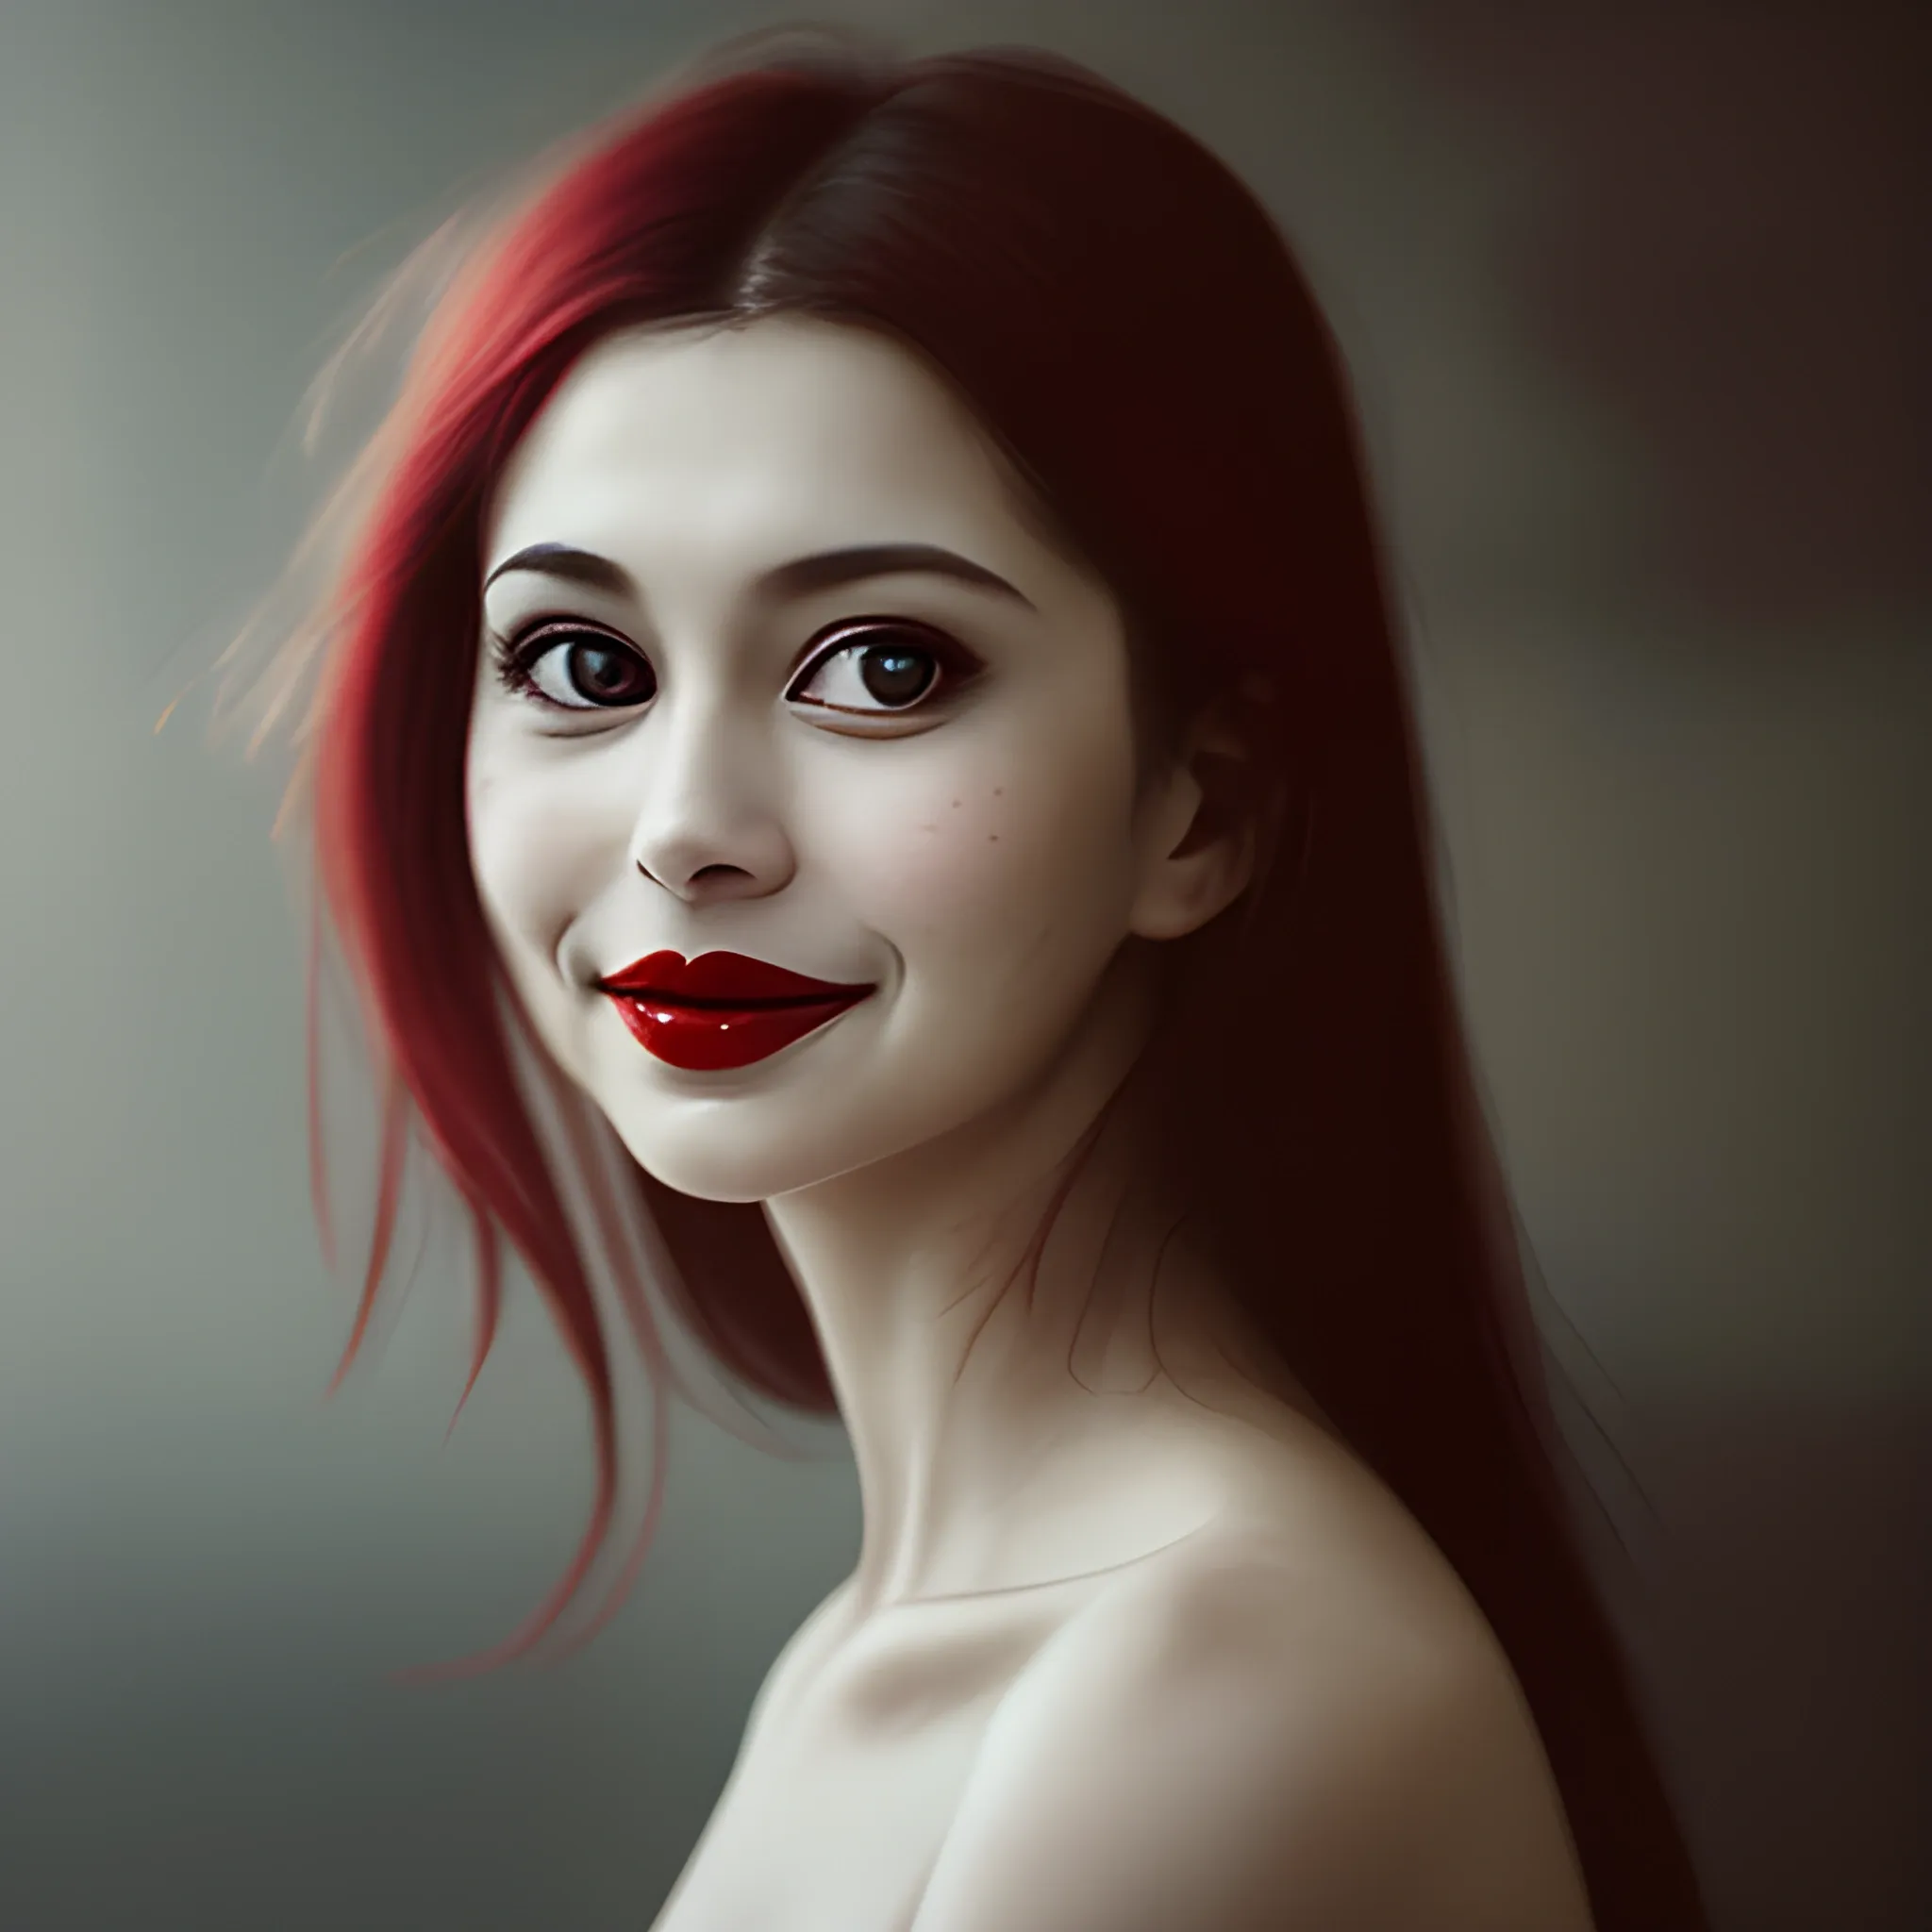 Against a blurred background, a red-lipped smile faintly plays at the corners of her mouth while her eyes stare longingly off camera, lost in thought.